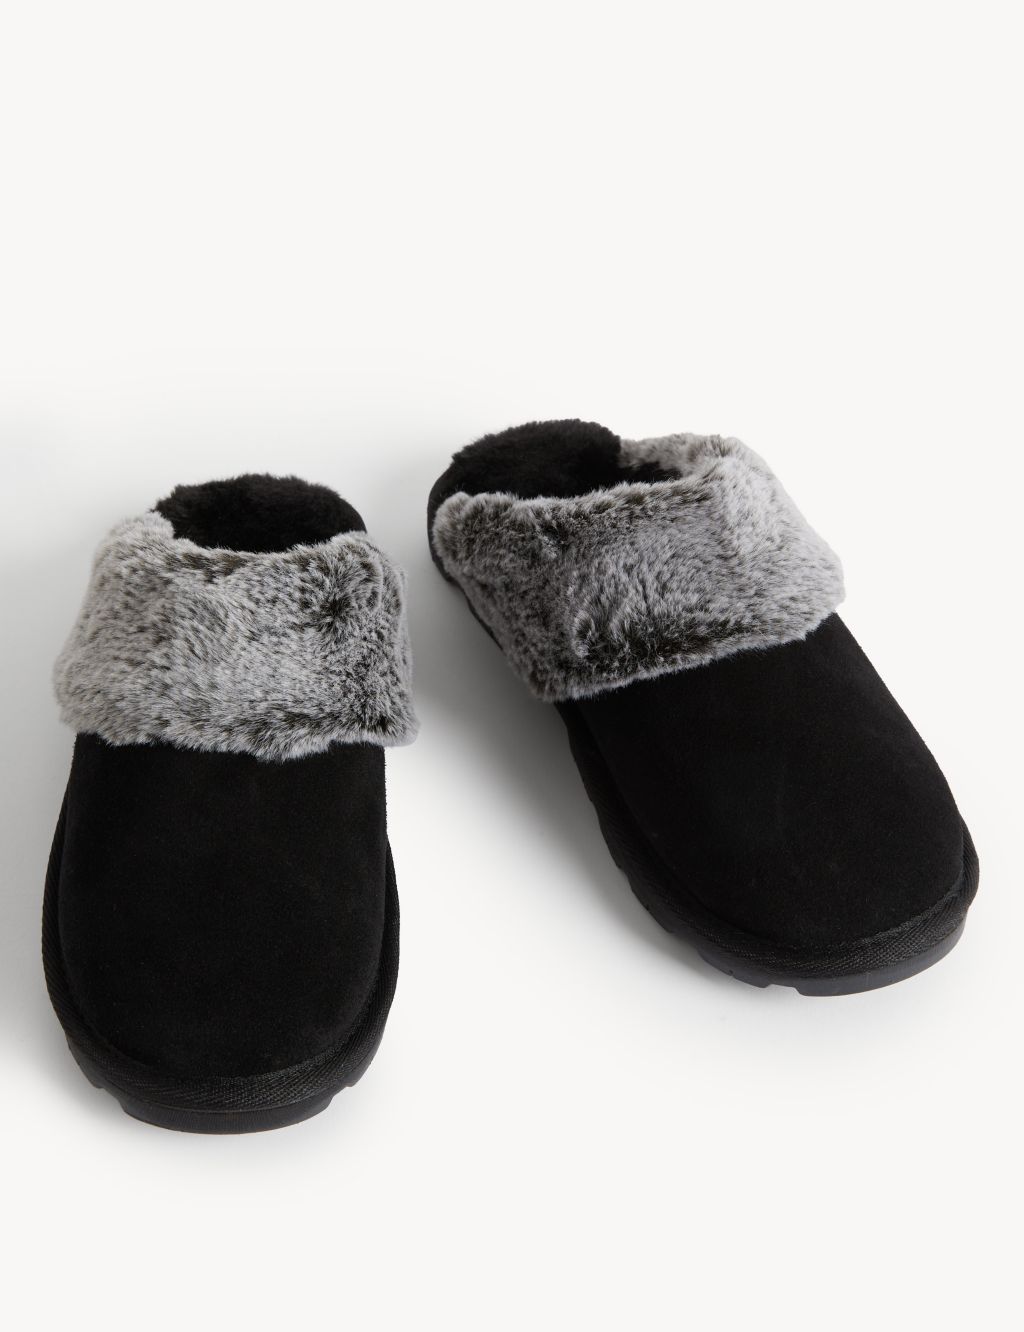 Suede Faux Fur Lined Mule Slippers image 2